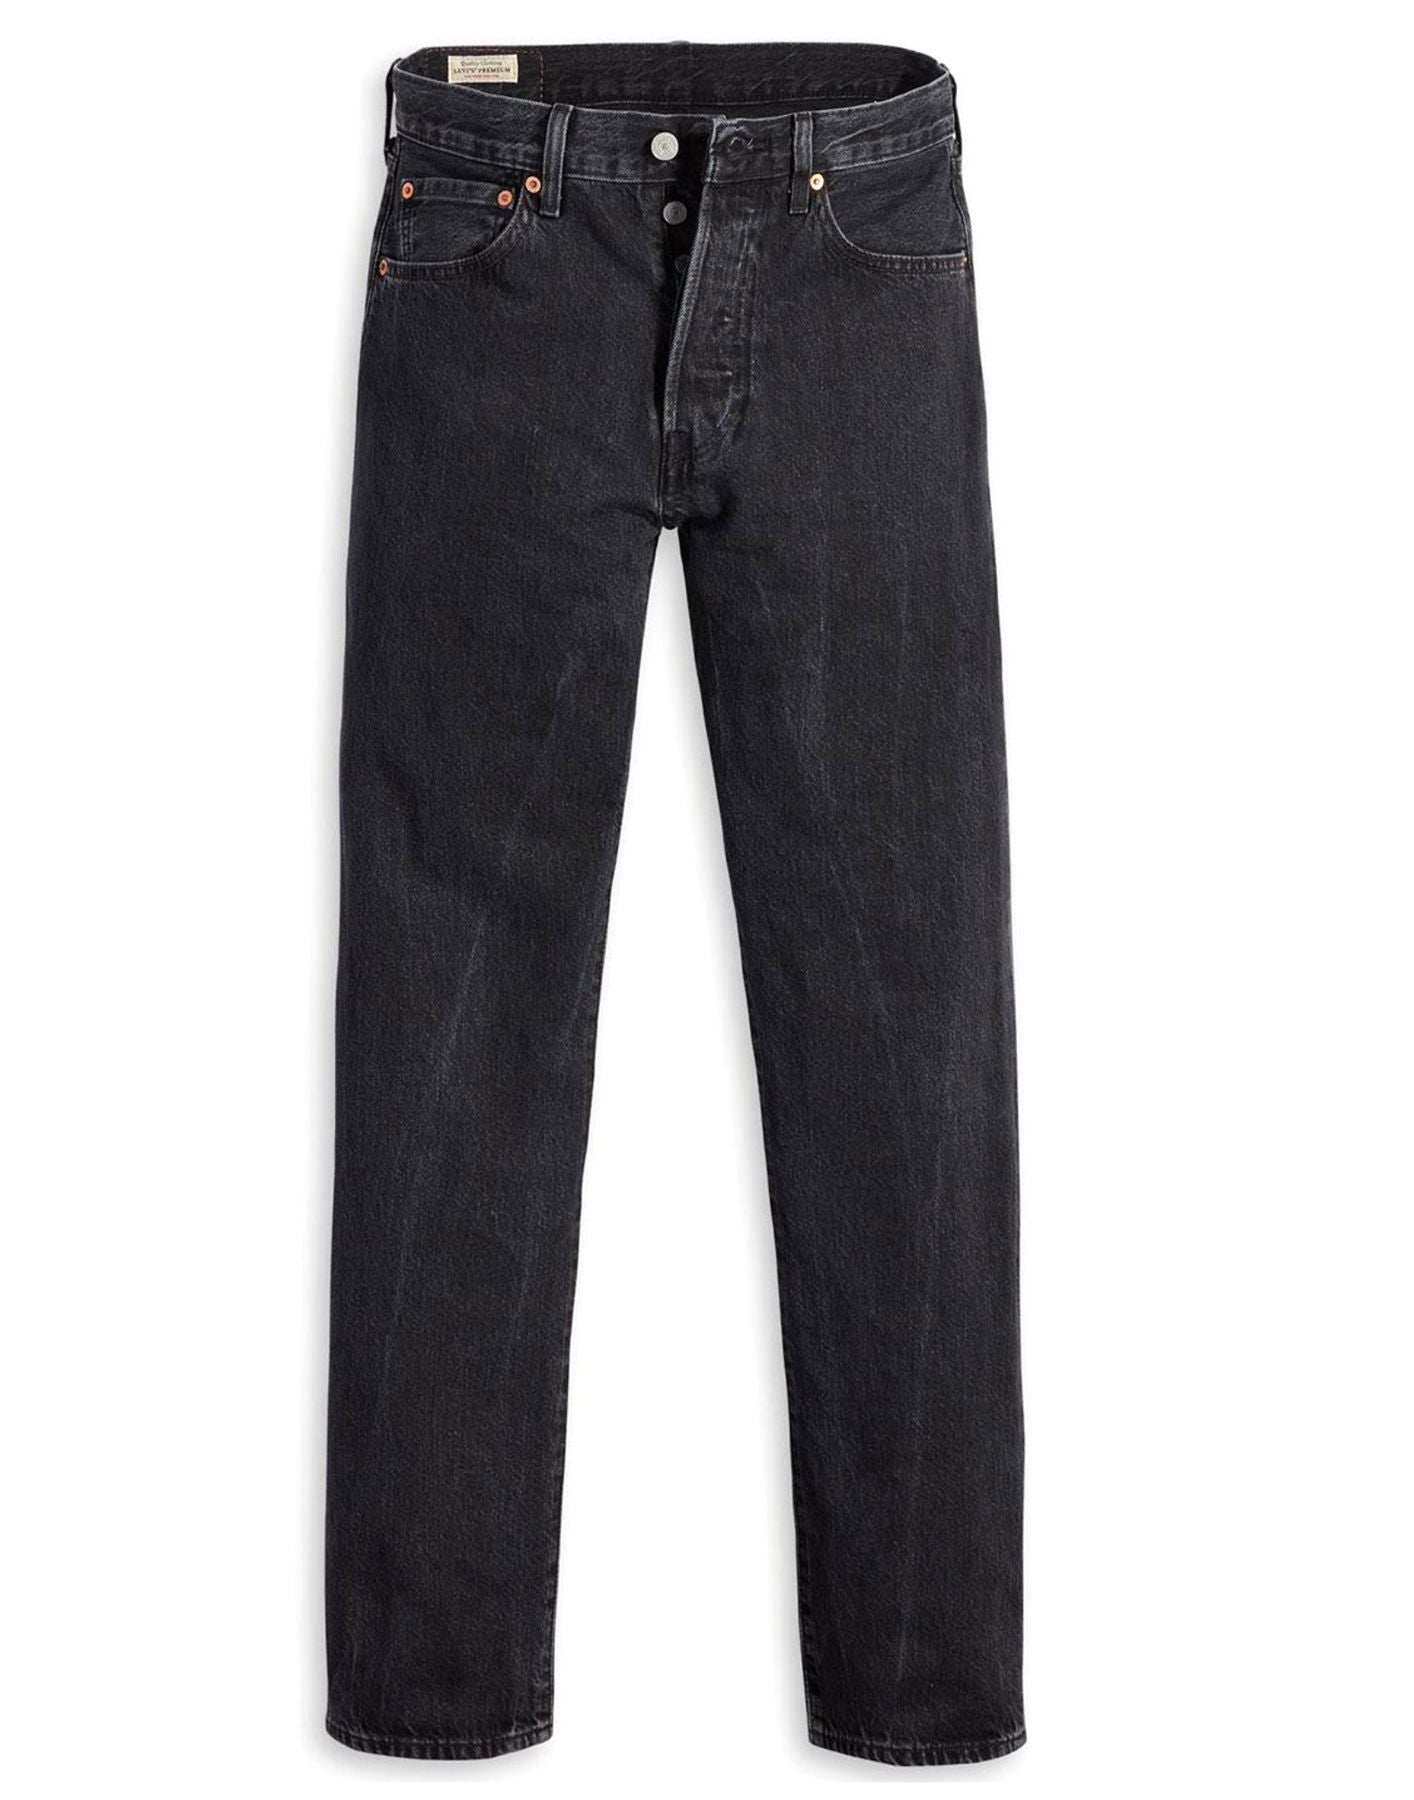 Jeans for man 005013371 Levi's